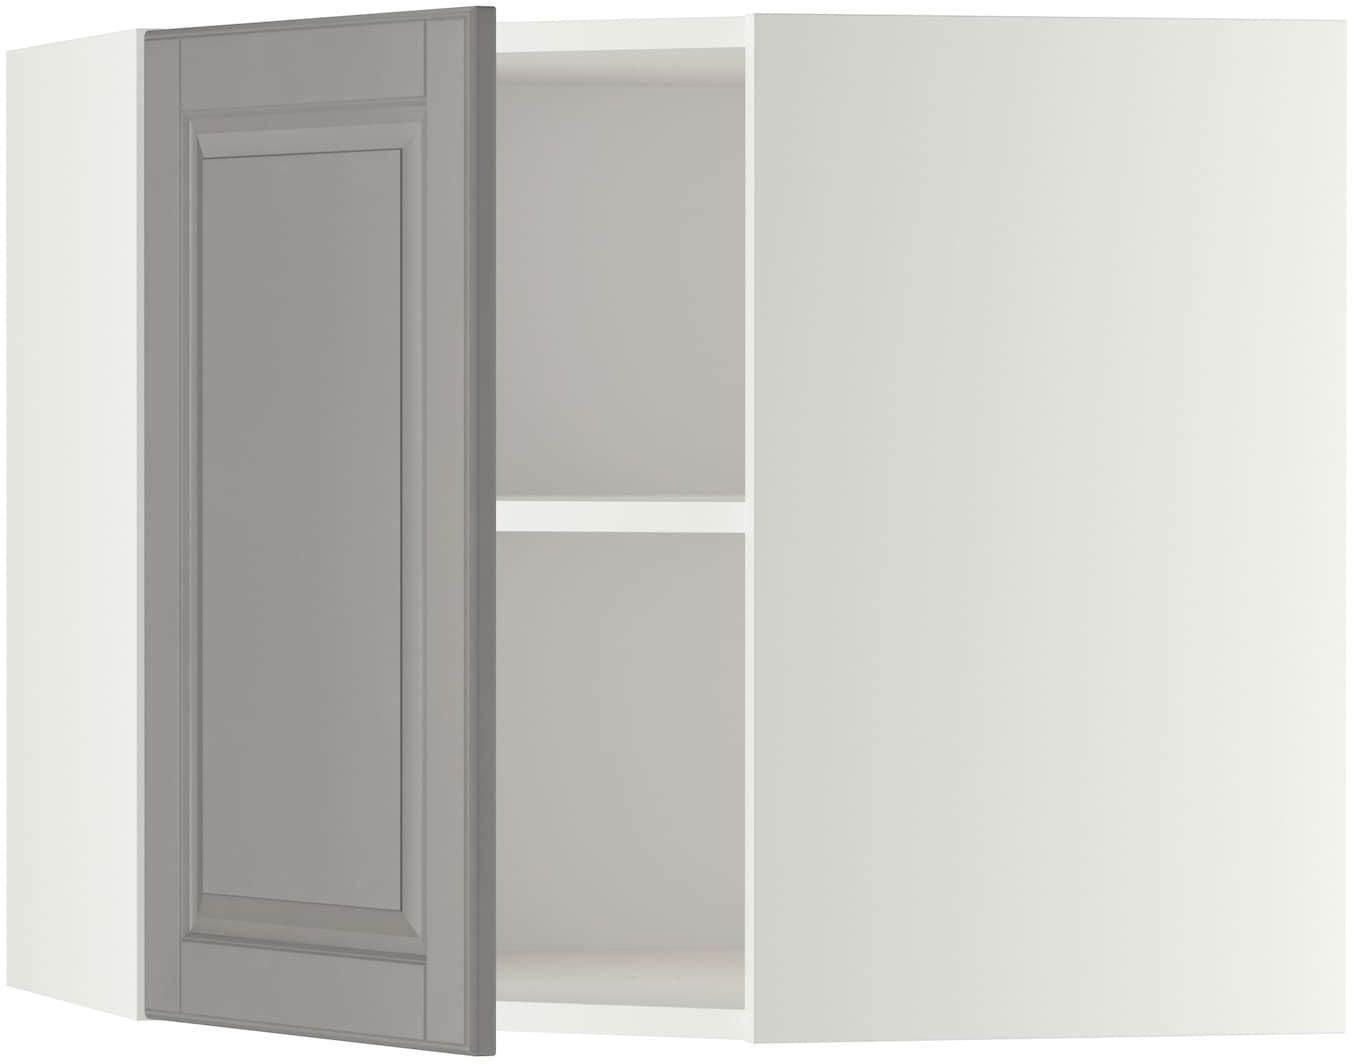 METOD Corner wall cabinet with shelves - white/Bodbyn grey 68x60 cm